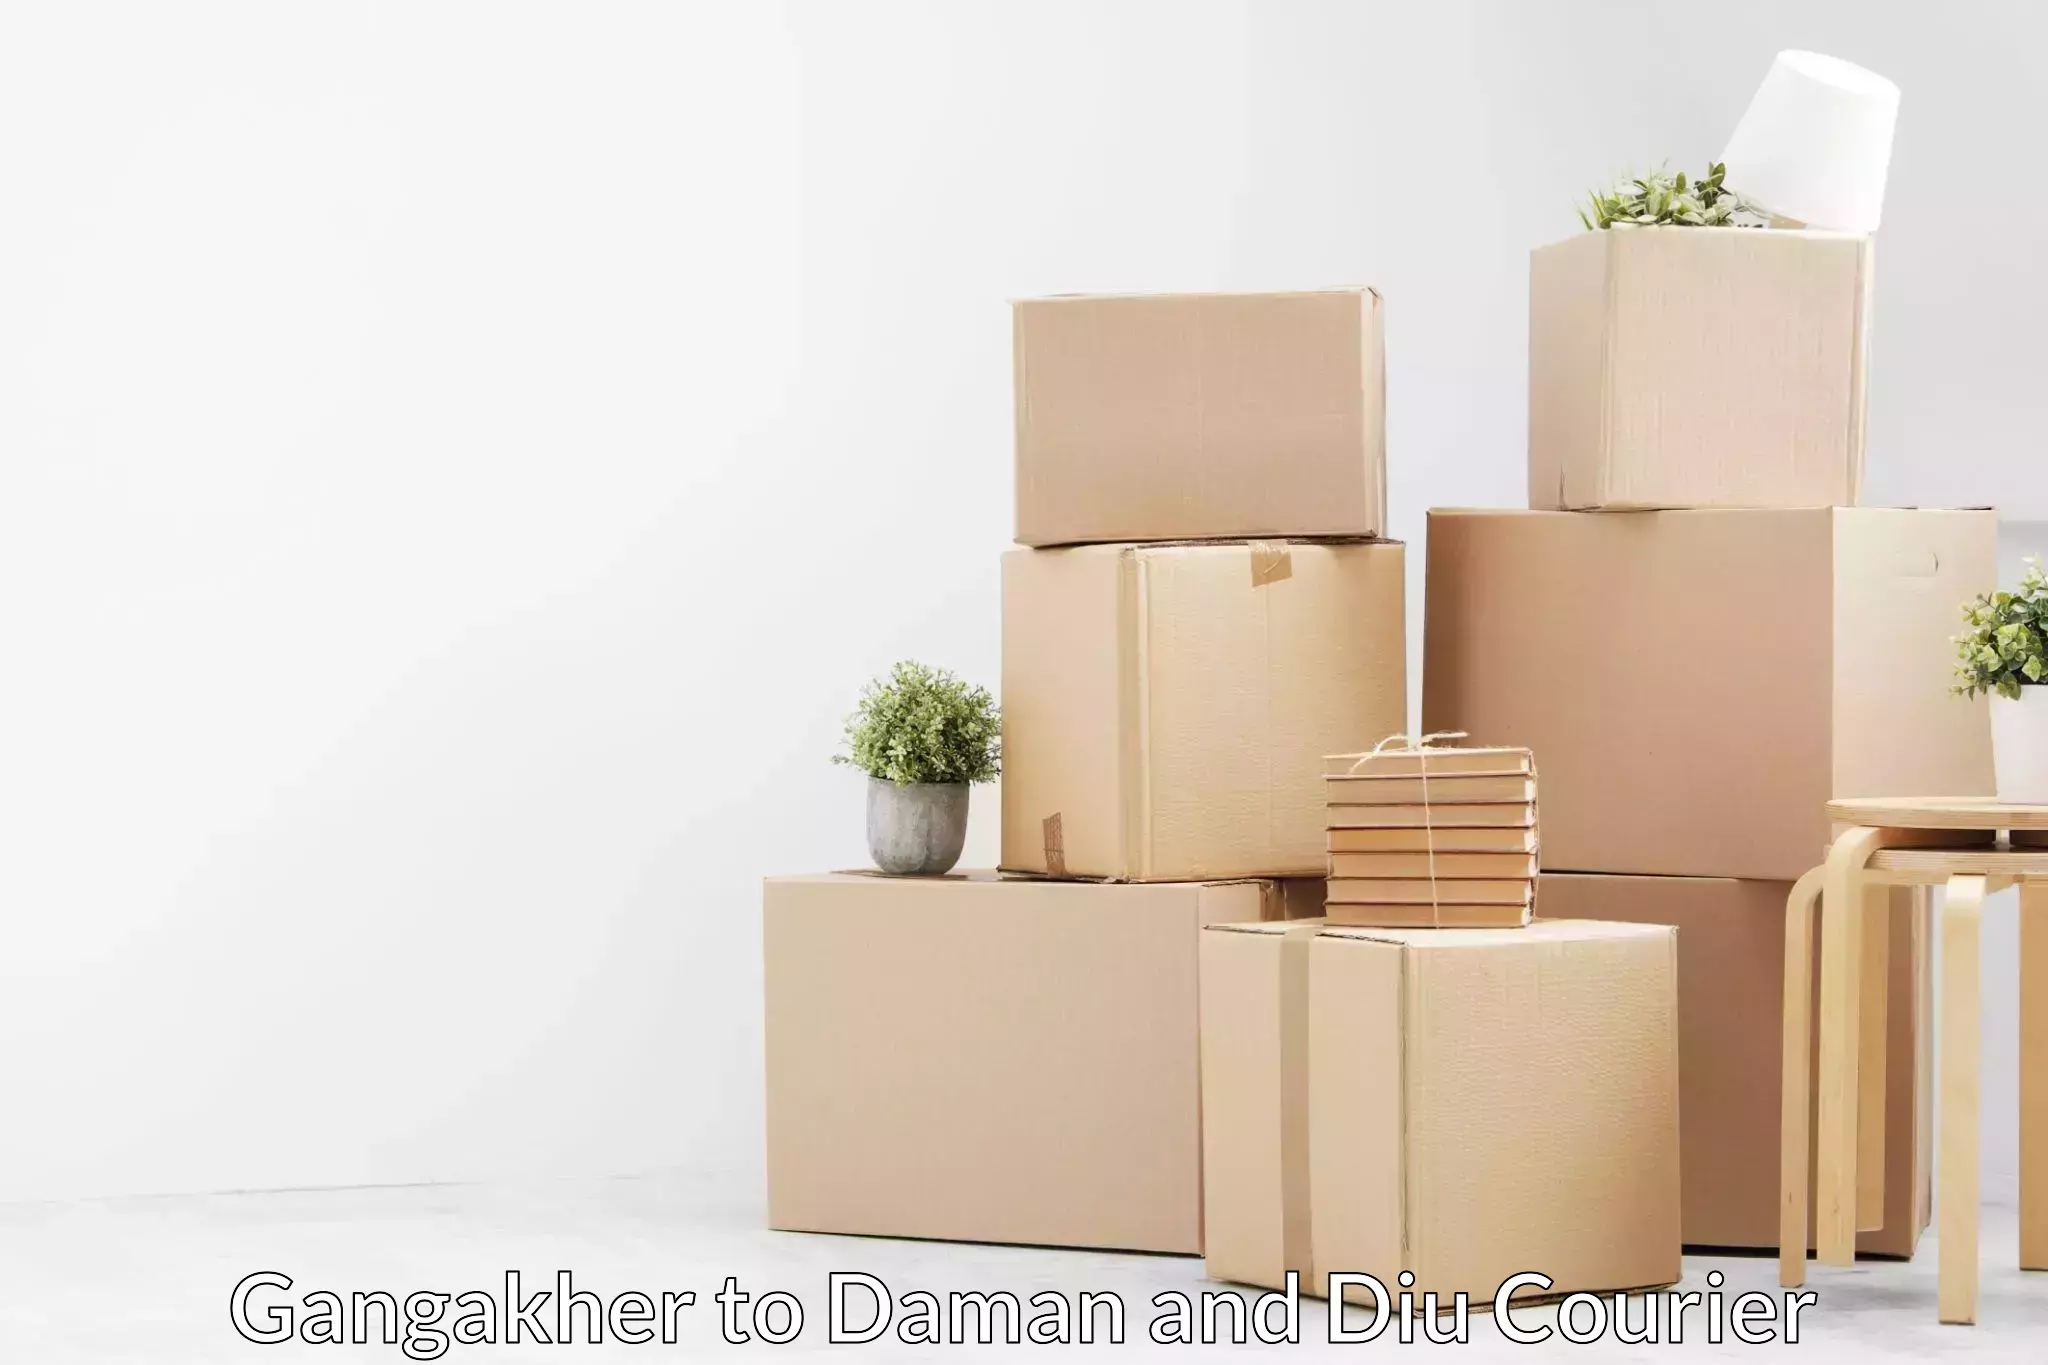 Efficient moving company Gangakher to Daman and Diu